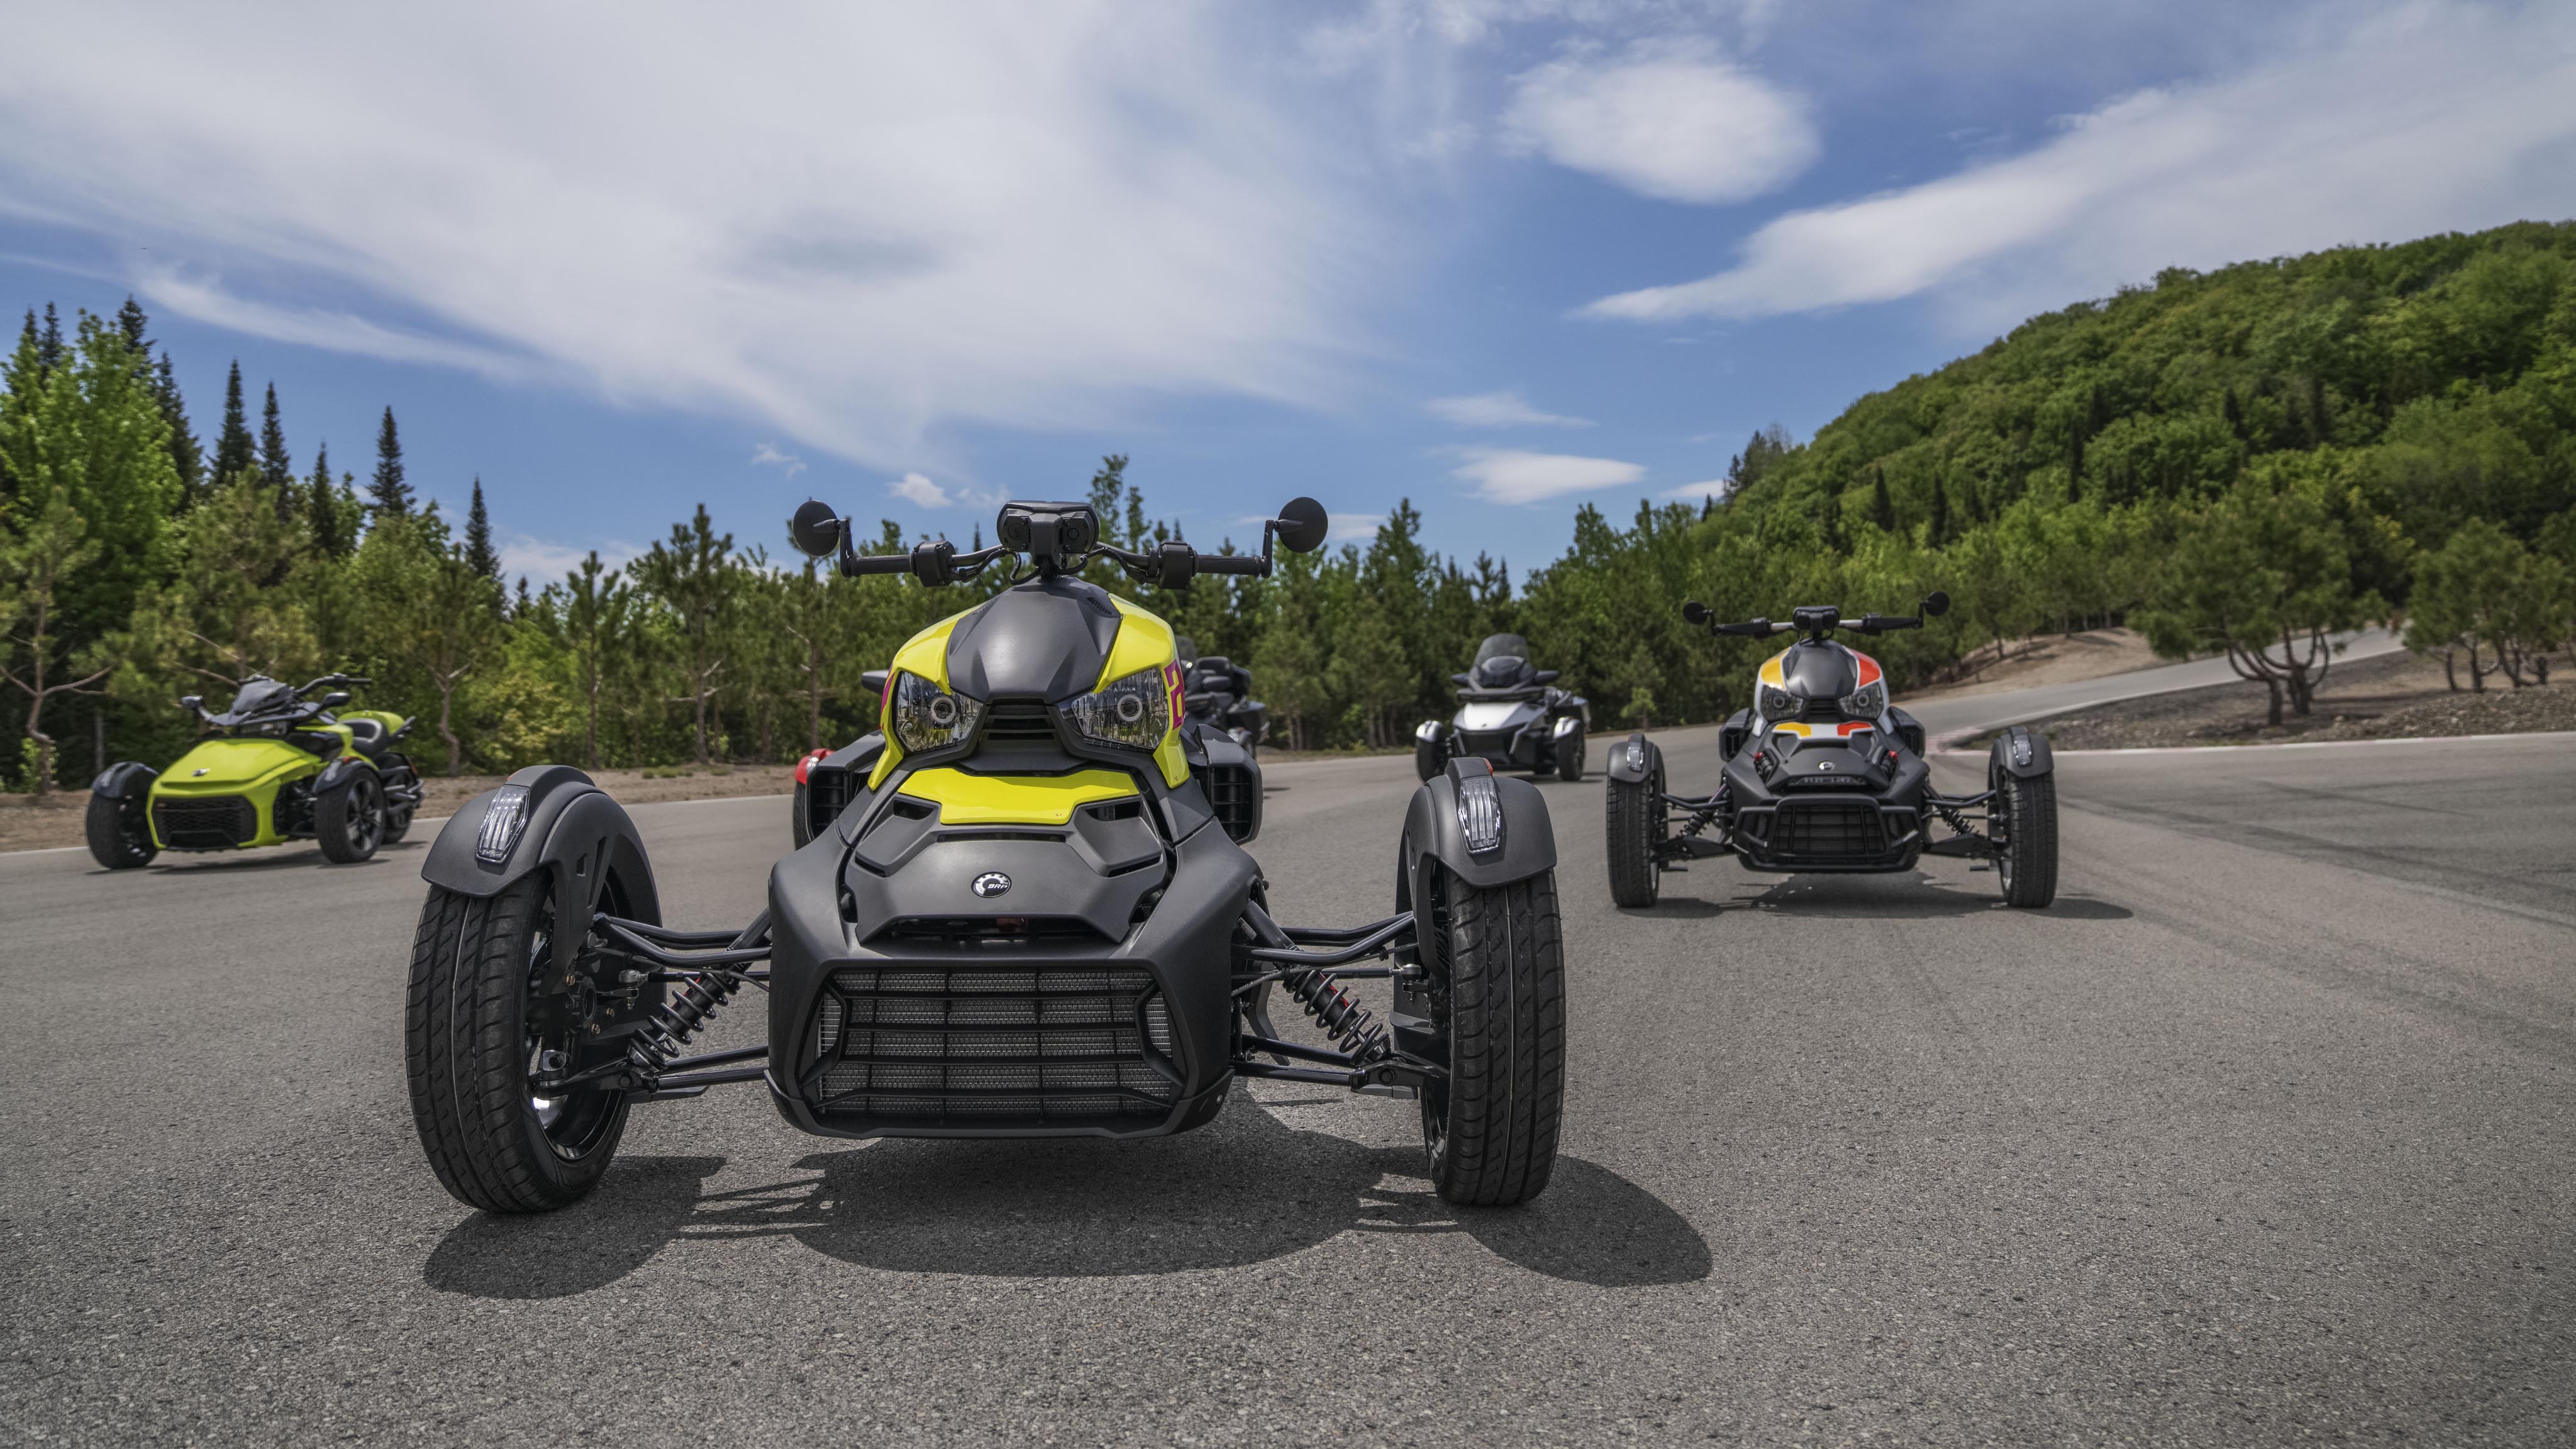 2022 Can-am Ryker and Spyder lineup